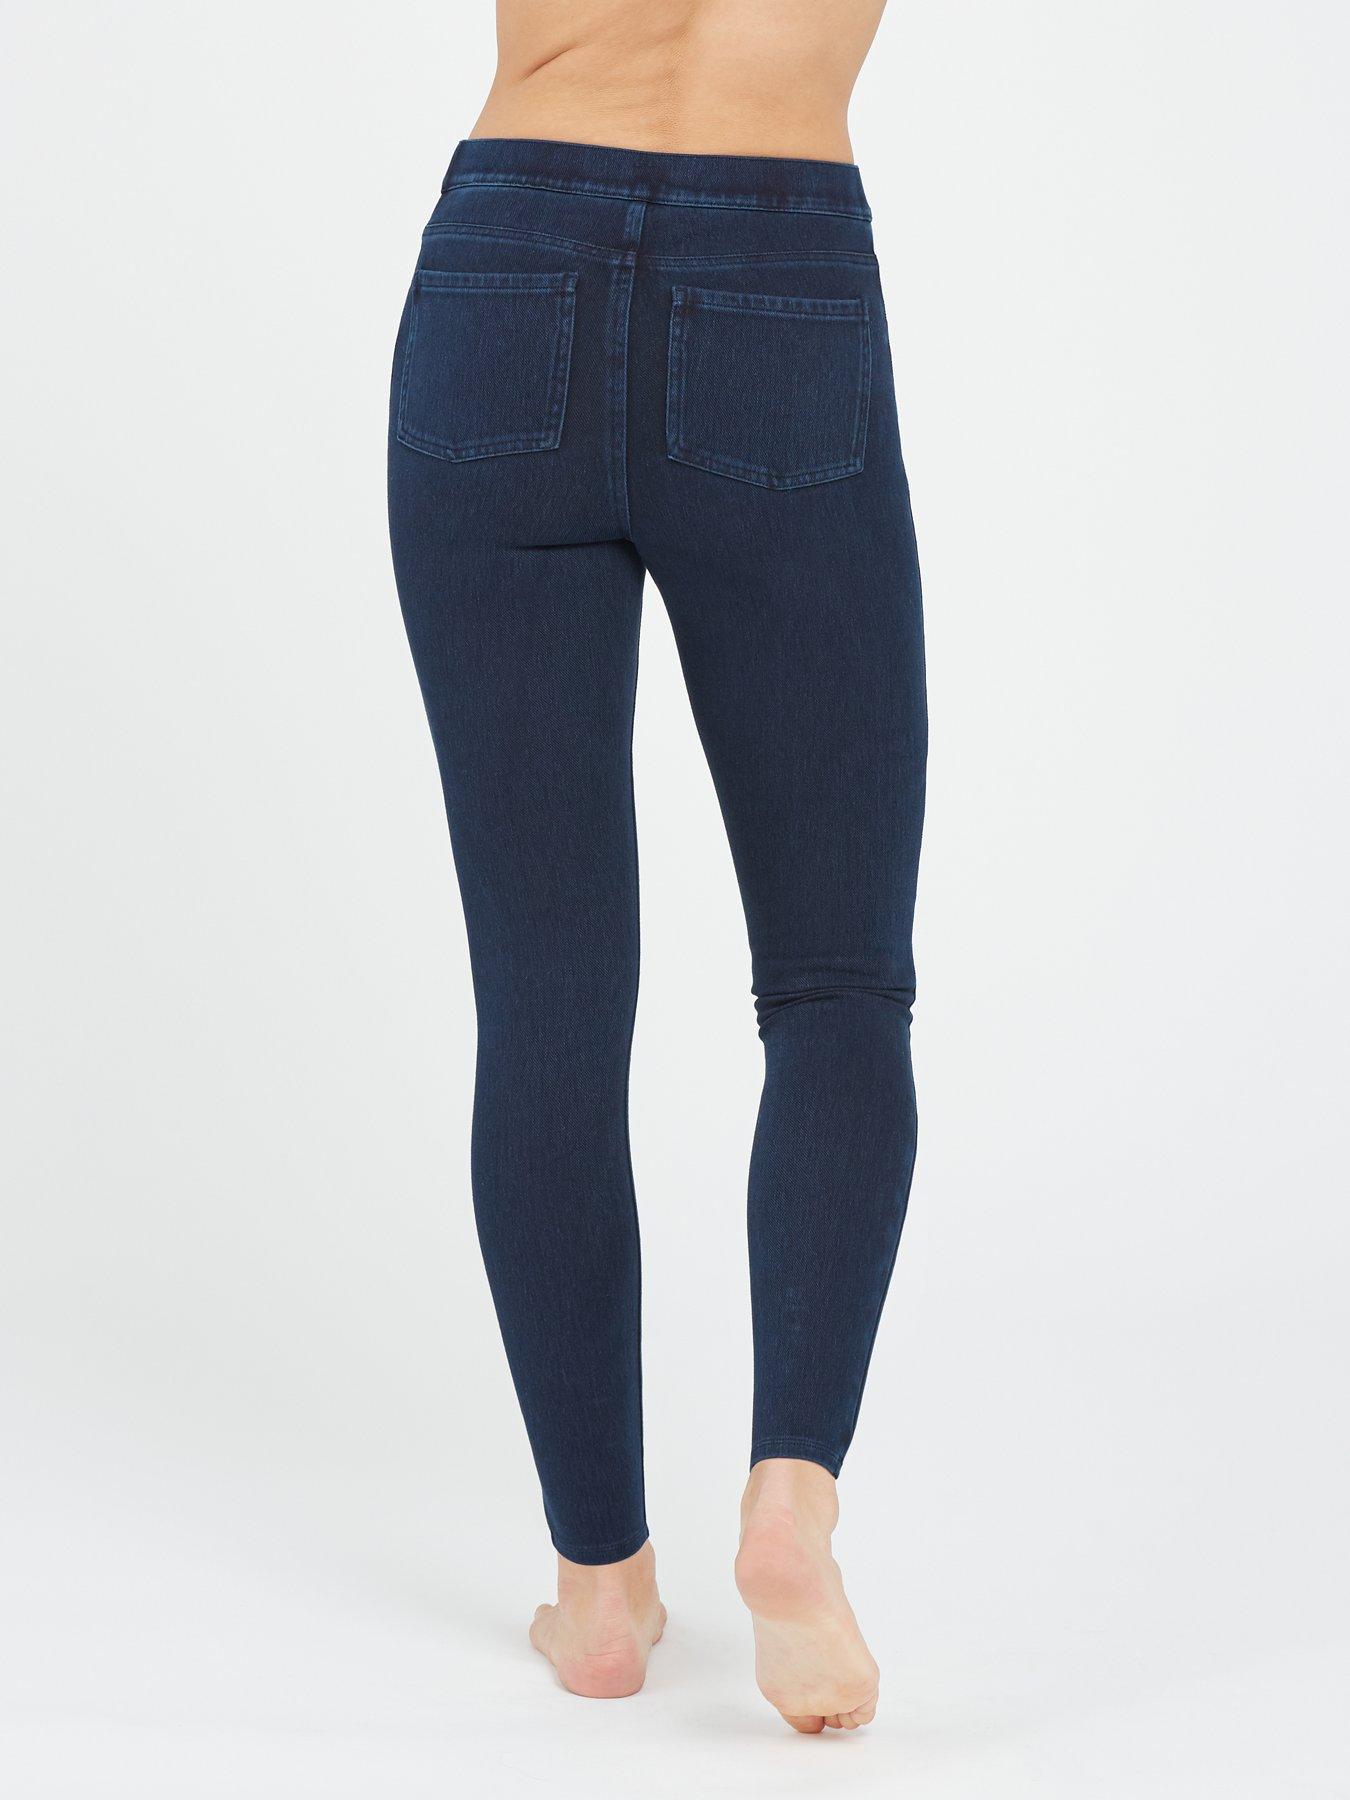 Spanx Leggings – The Blue Collection